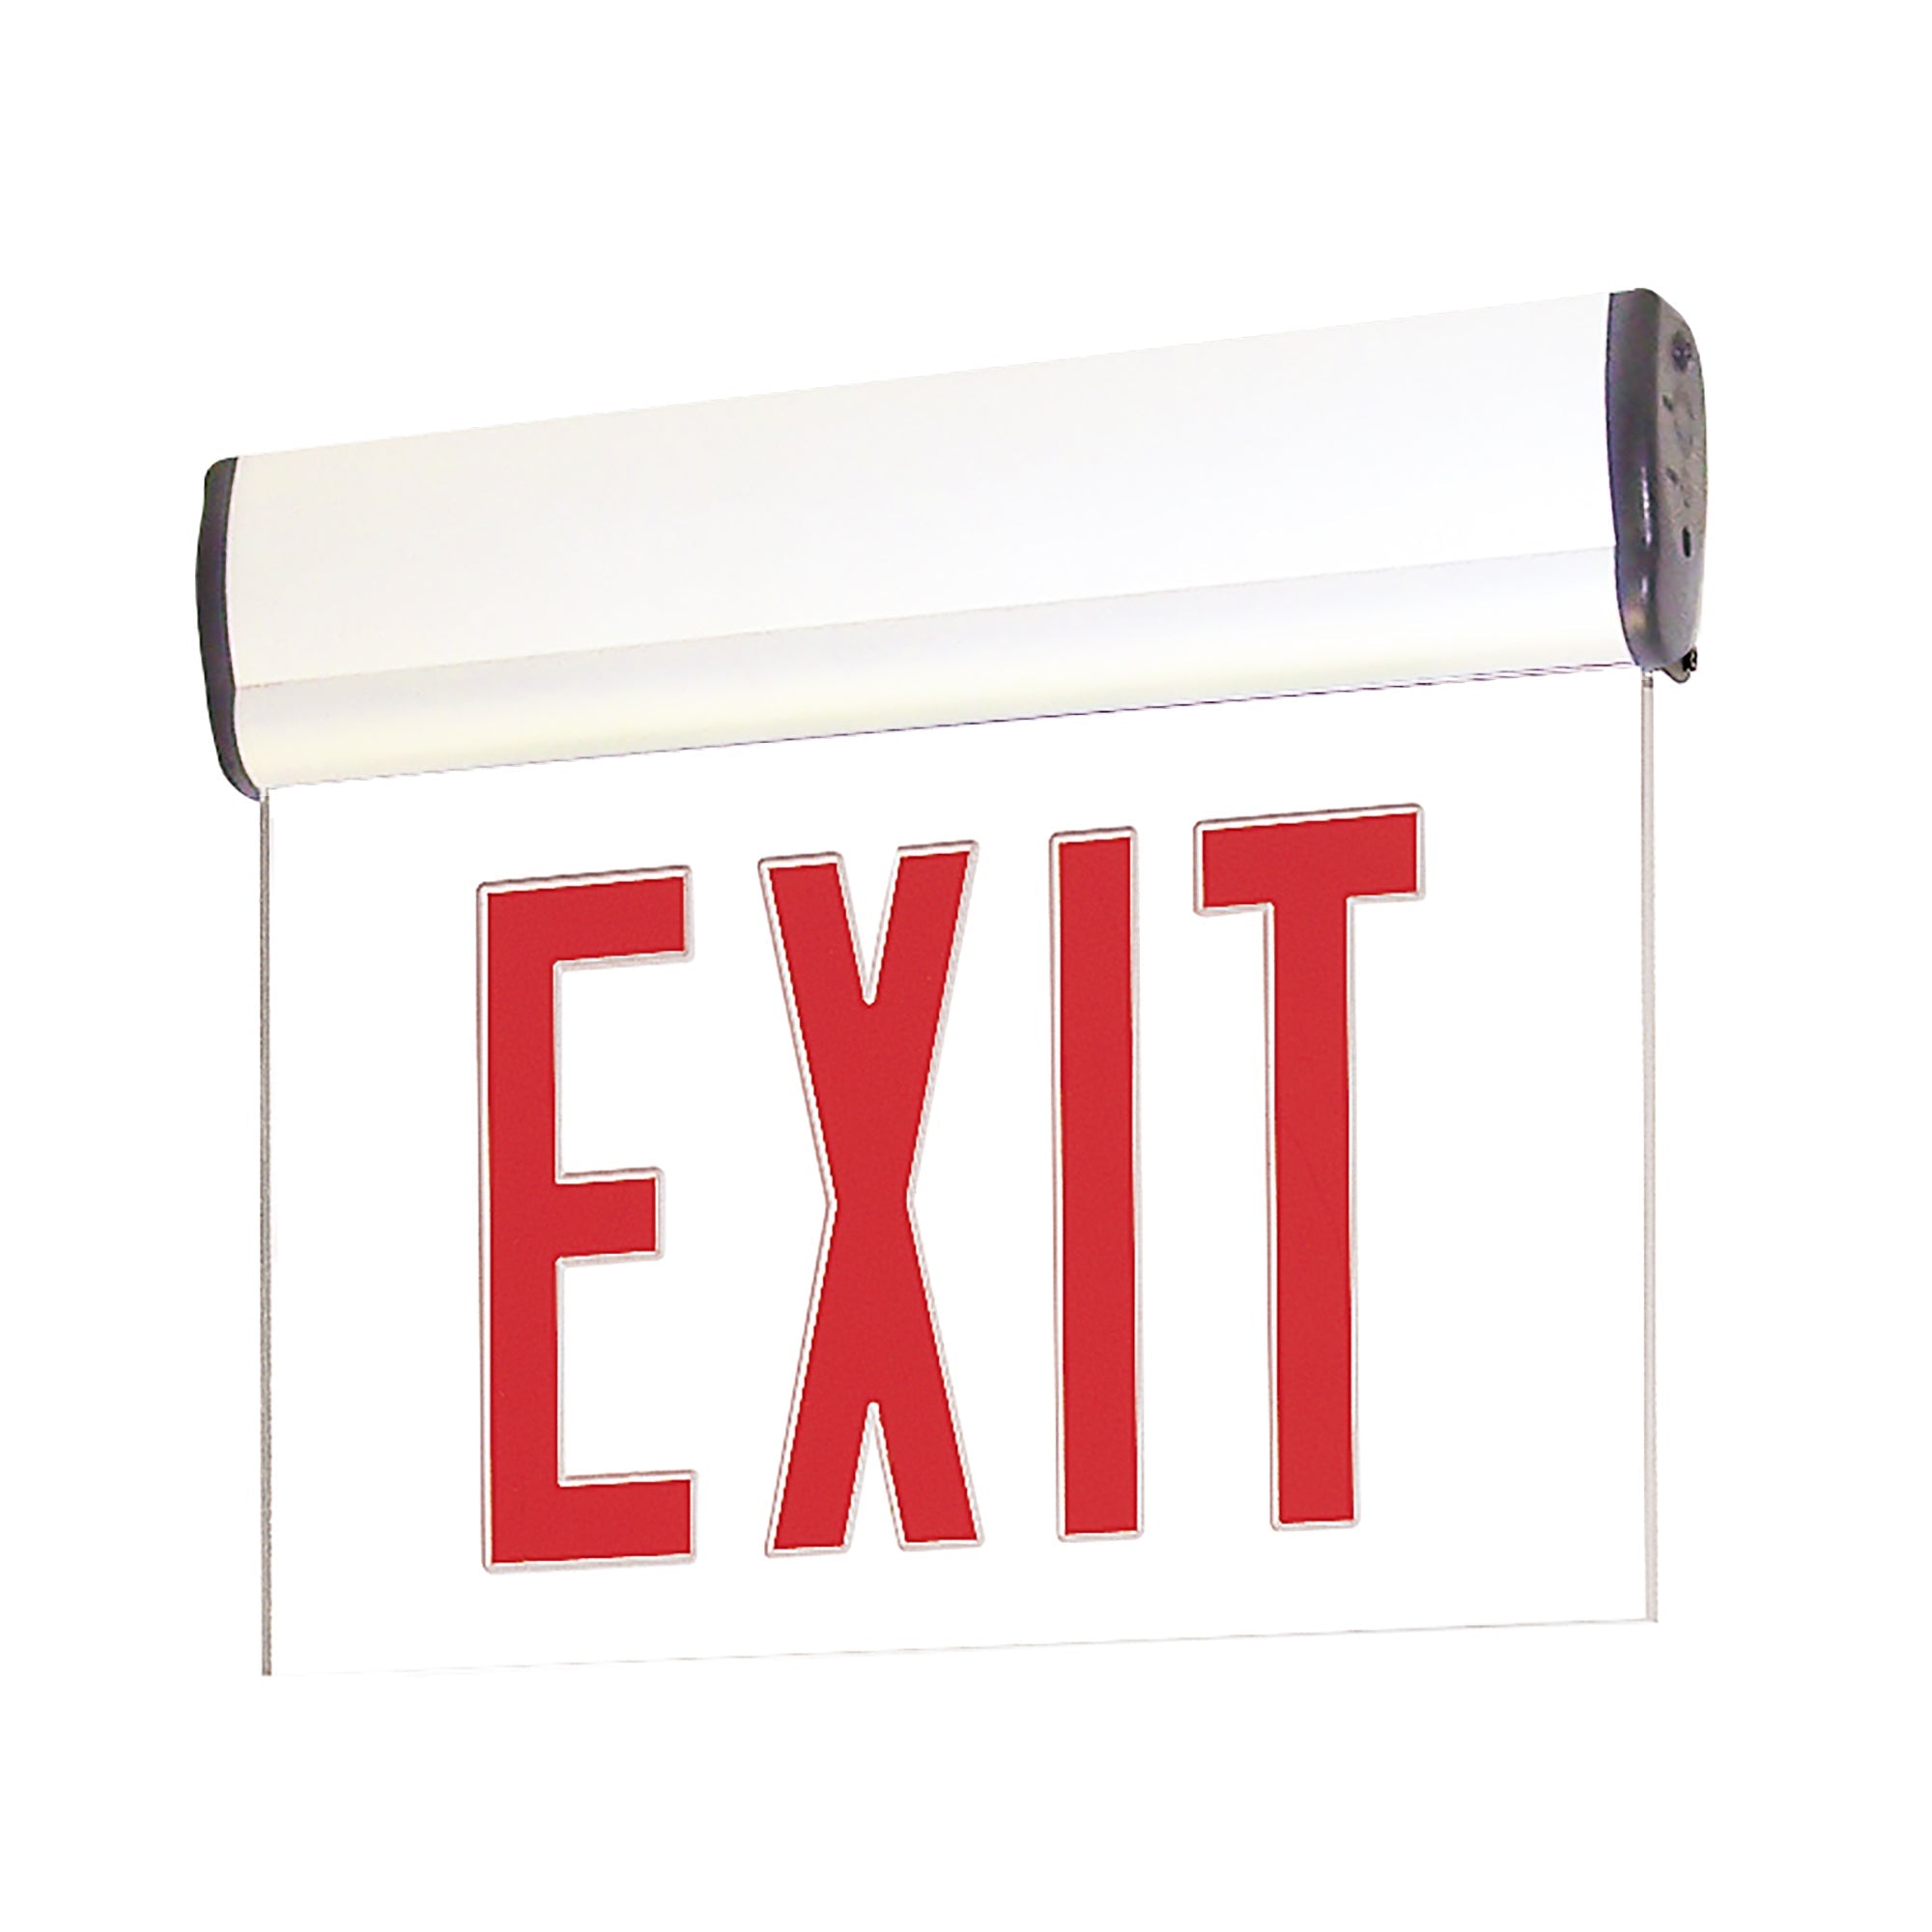 Nora Lighting NX-811-LEDRCW - Exit / Emergency - Surface Adjustable LED Edge-Lit Exit Sign, 2 Circuit, Red Letters, Single Face / Clear Acrylic, White Housing